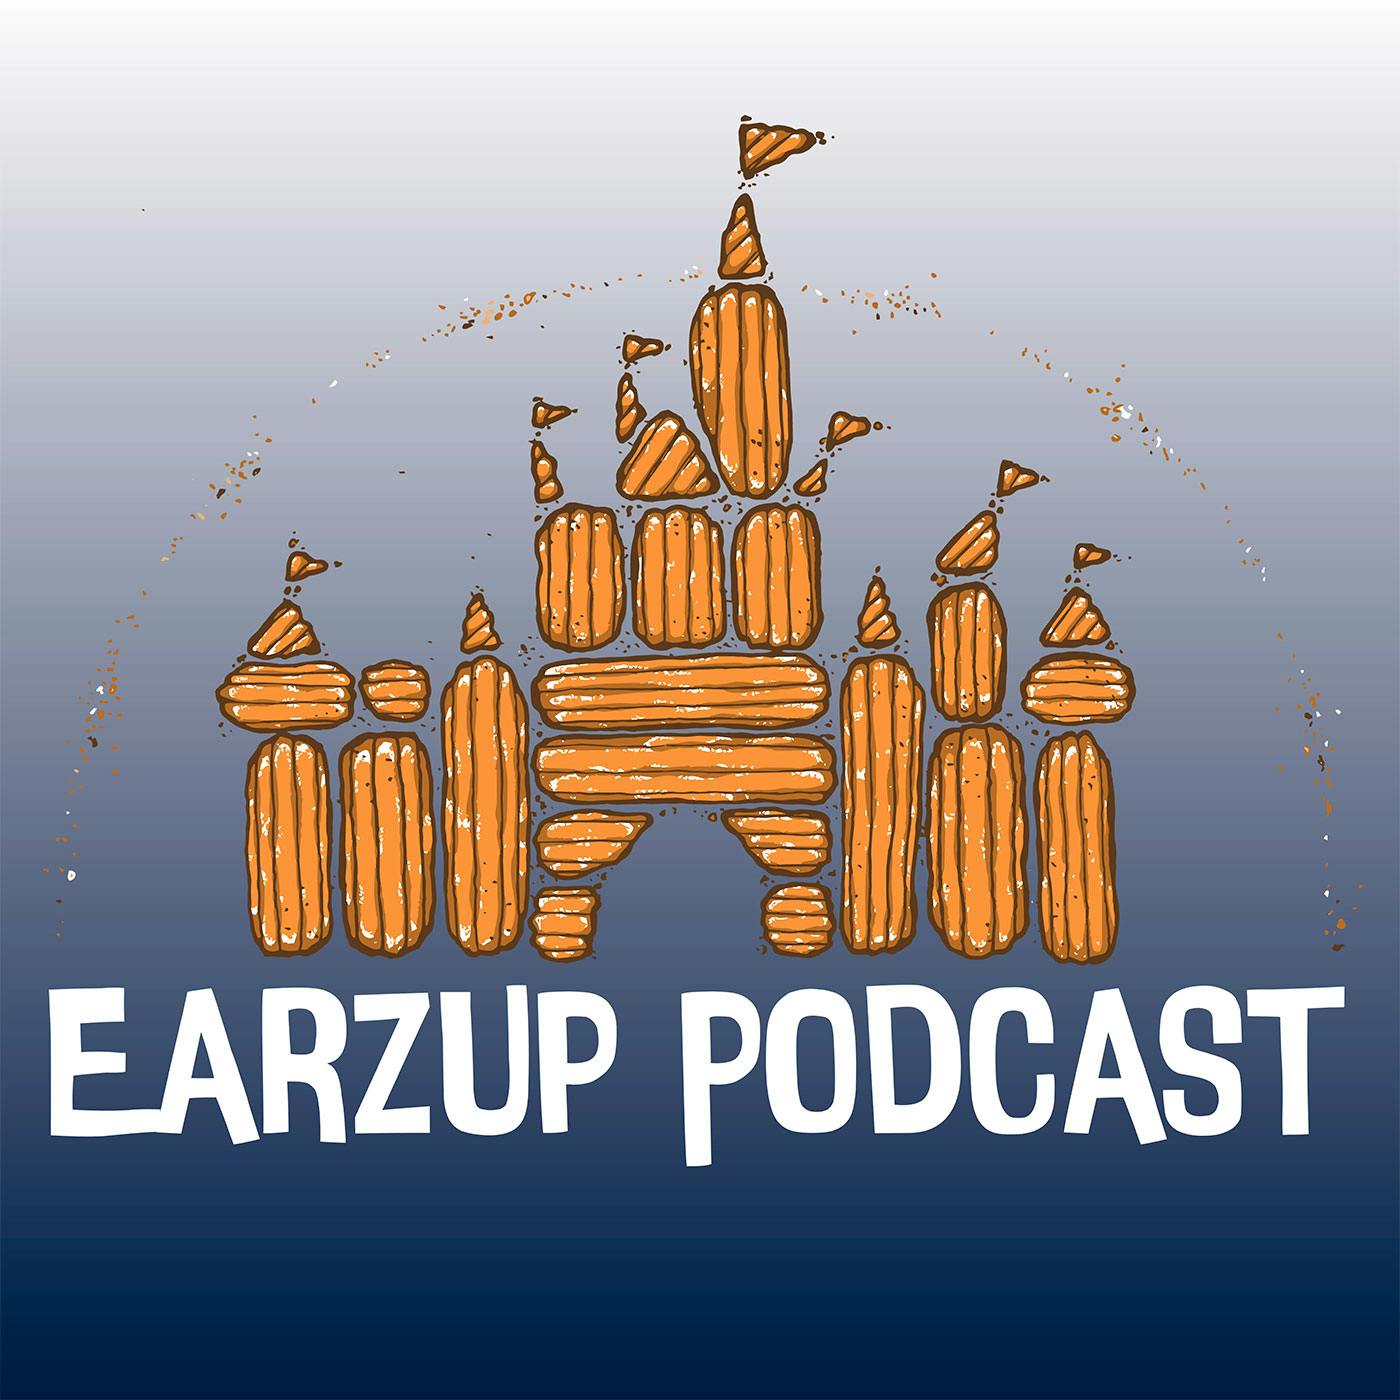 The EarzUp! Disney Sequel Project